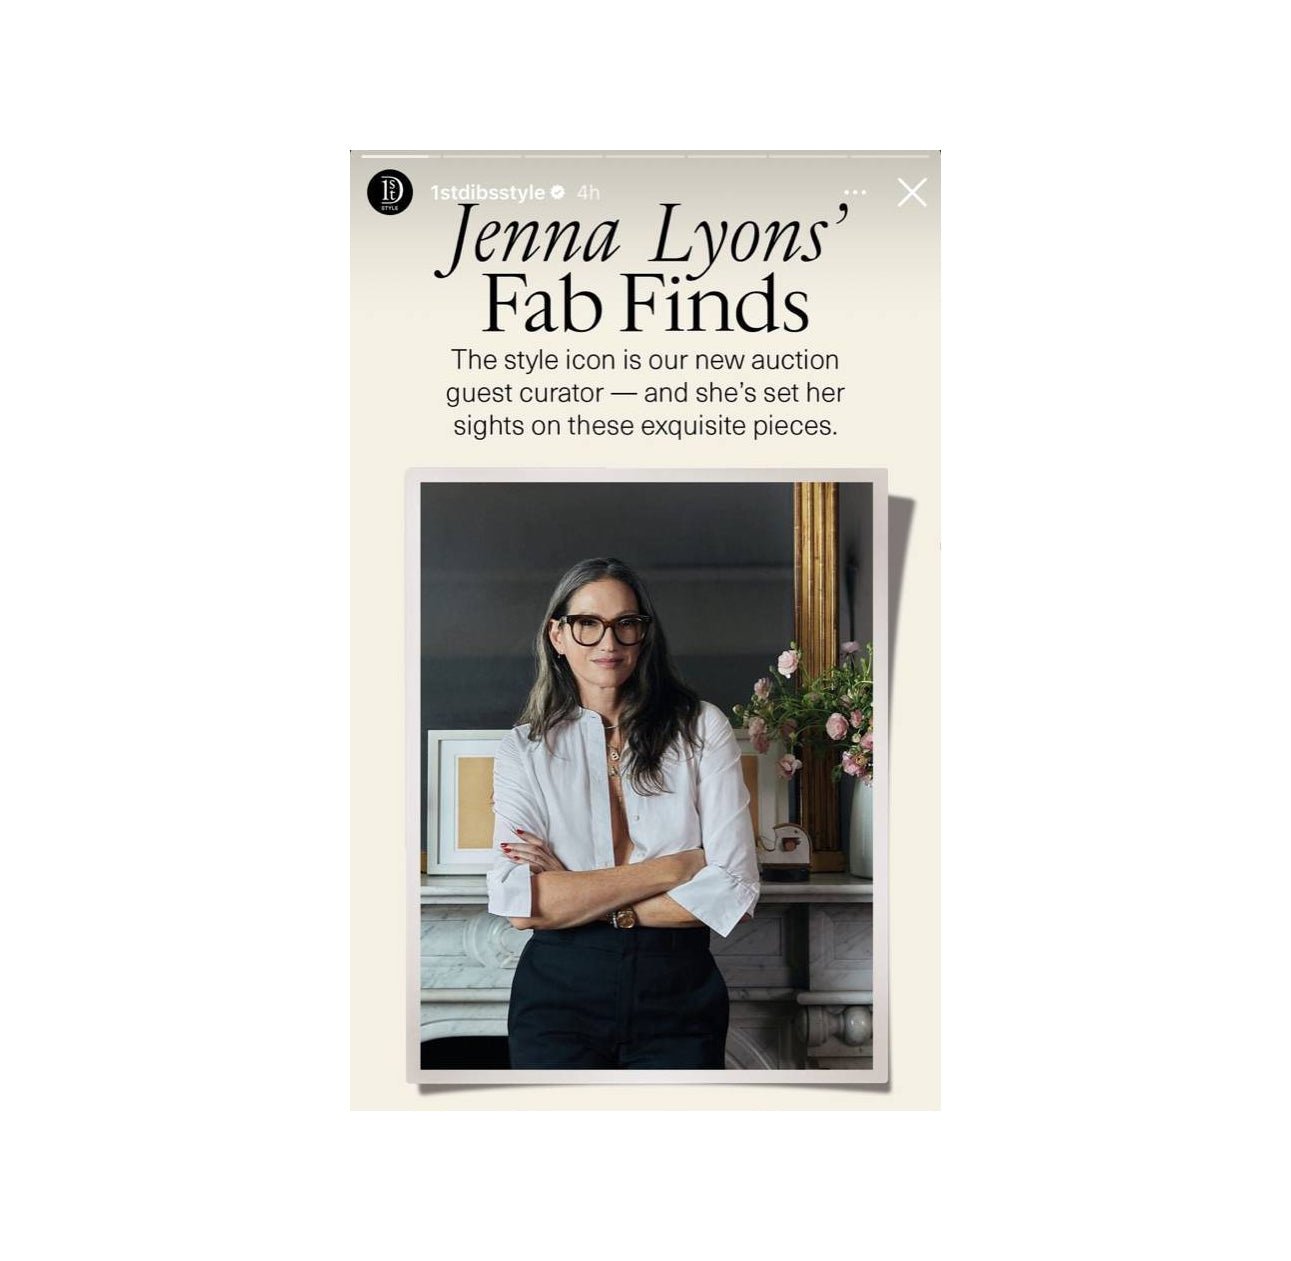 1stDibs Feature: style-CHNGR - Curator ' Jenna Lyons' for 1stDibs: Top 5 Fashion items - style - CHNGR